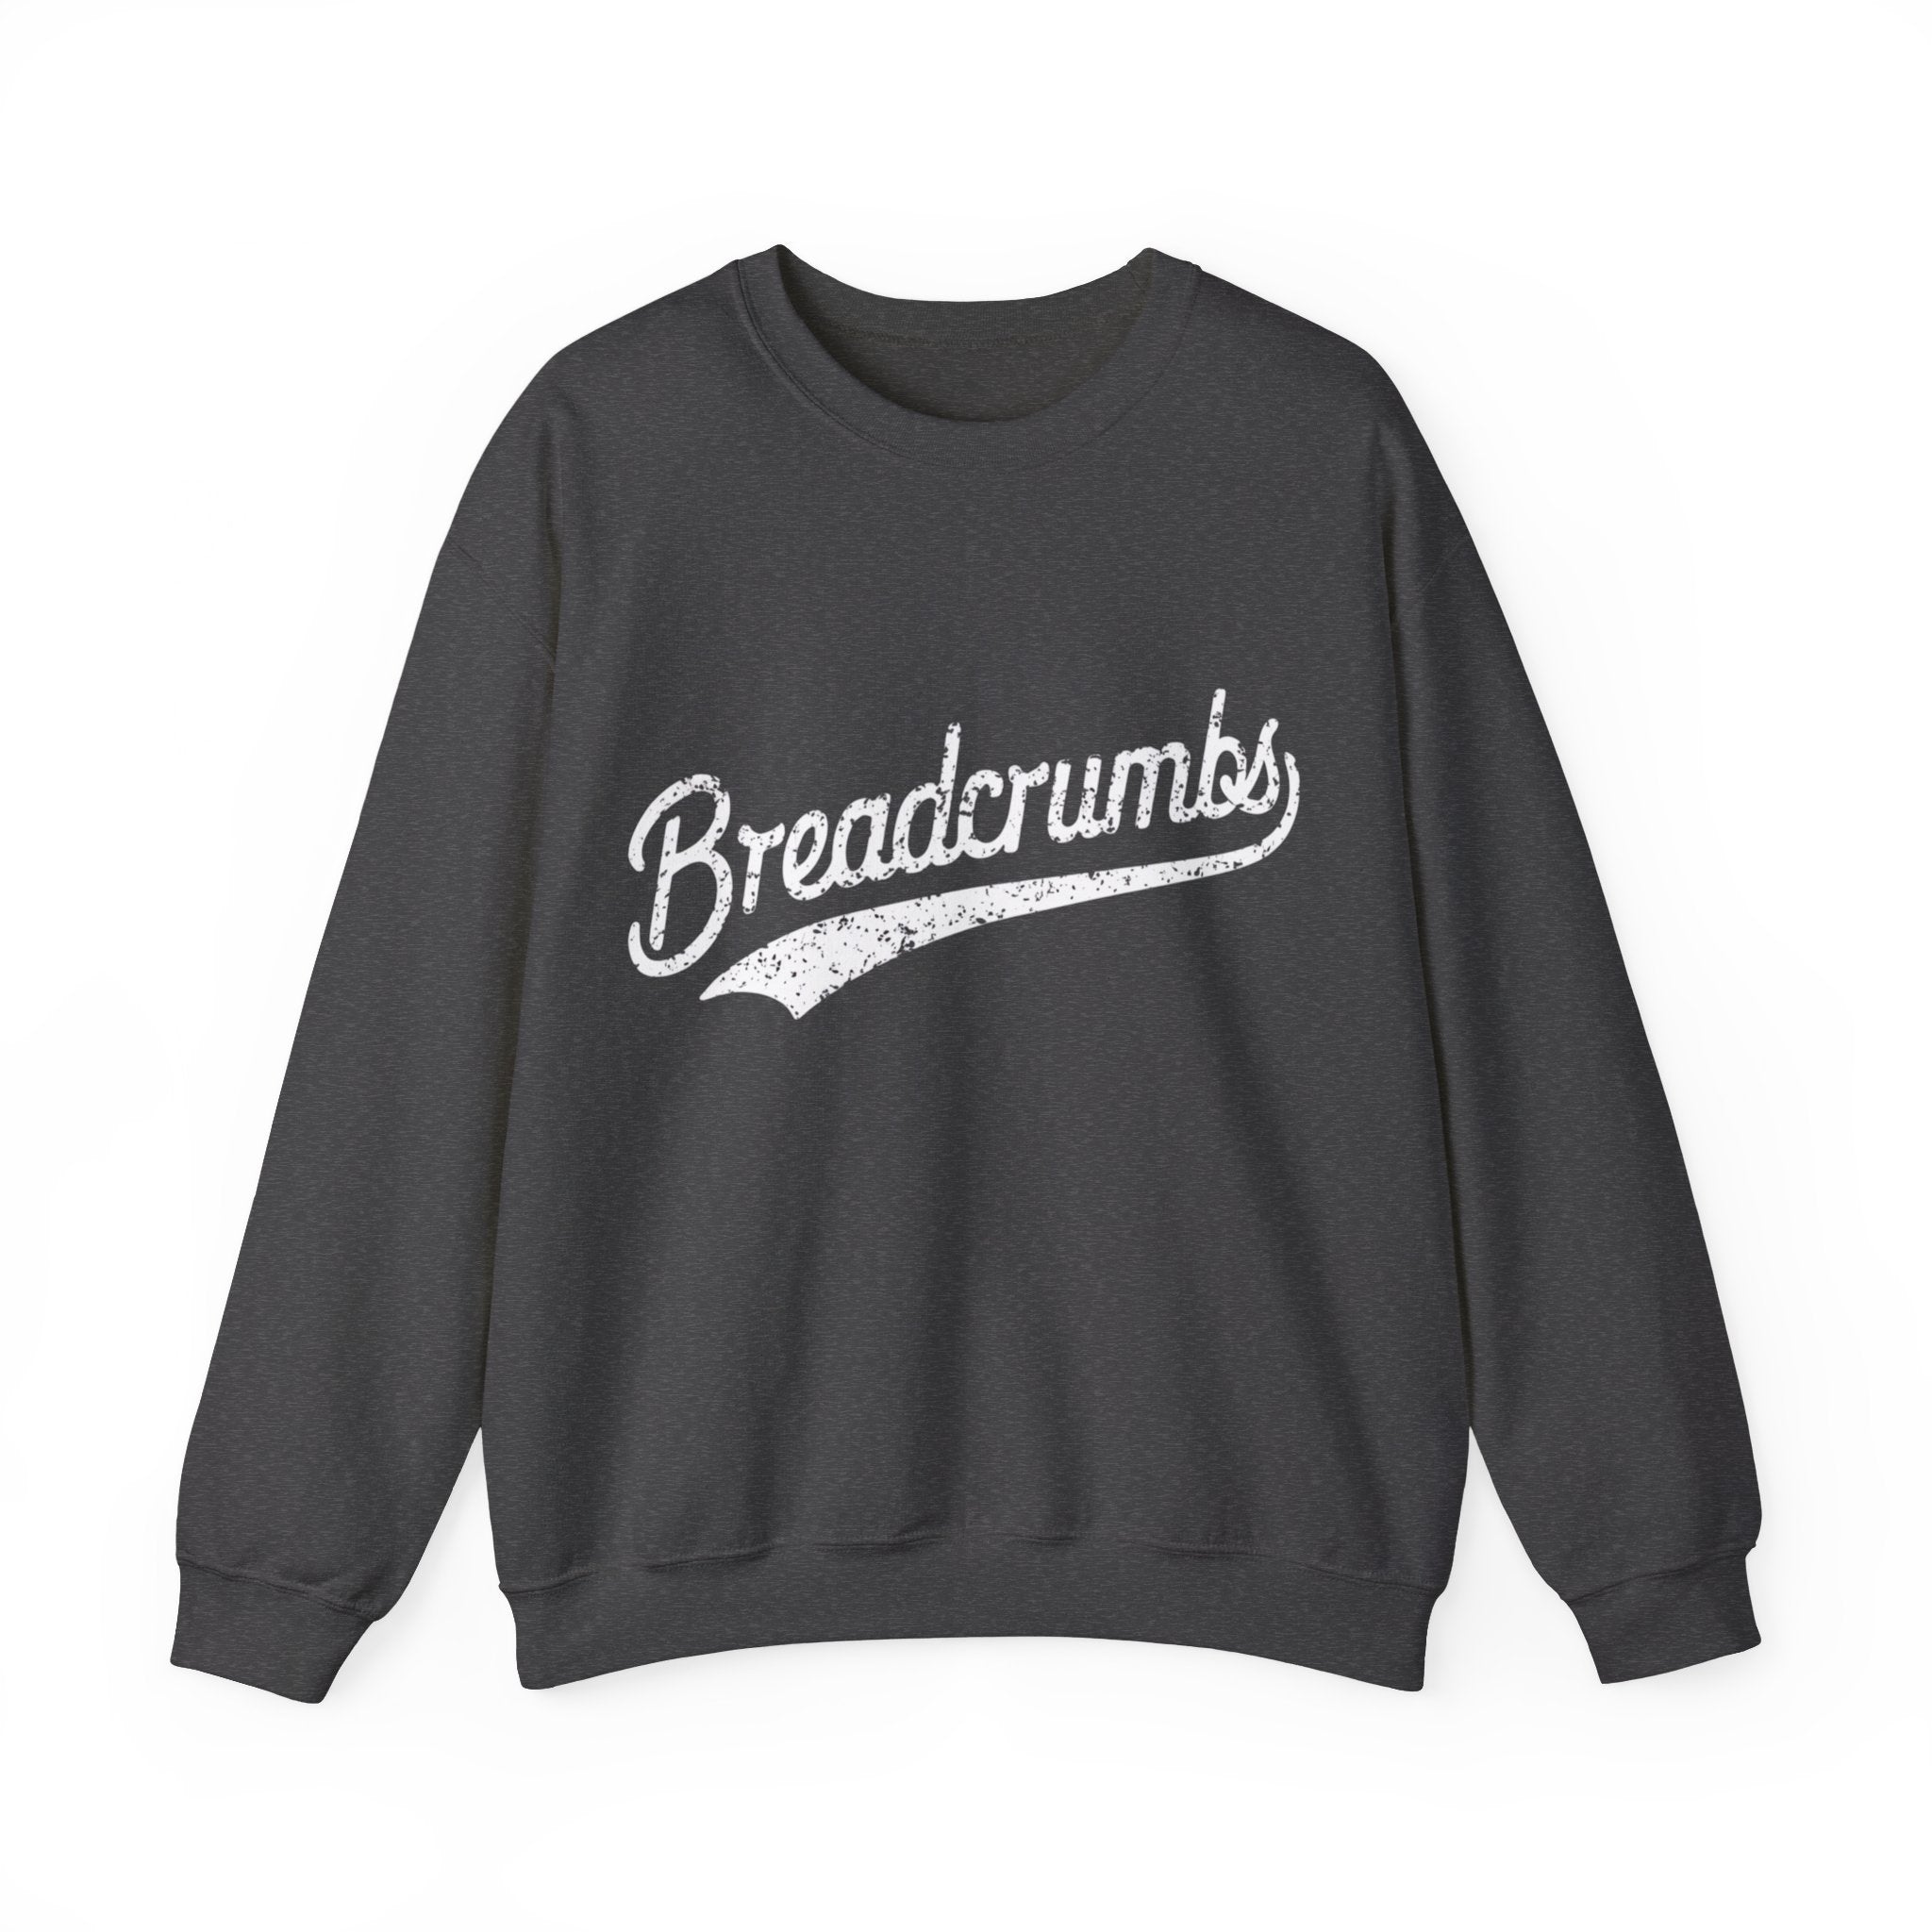 A cozy black Breadcrumbs - Sweatshirt perfect for the colder months, featuring the word "Breadcrumbs" written in white cursive text across the front.